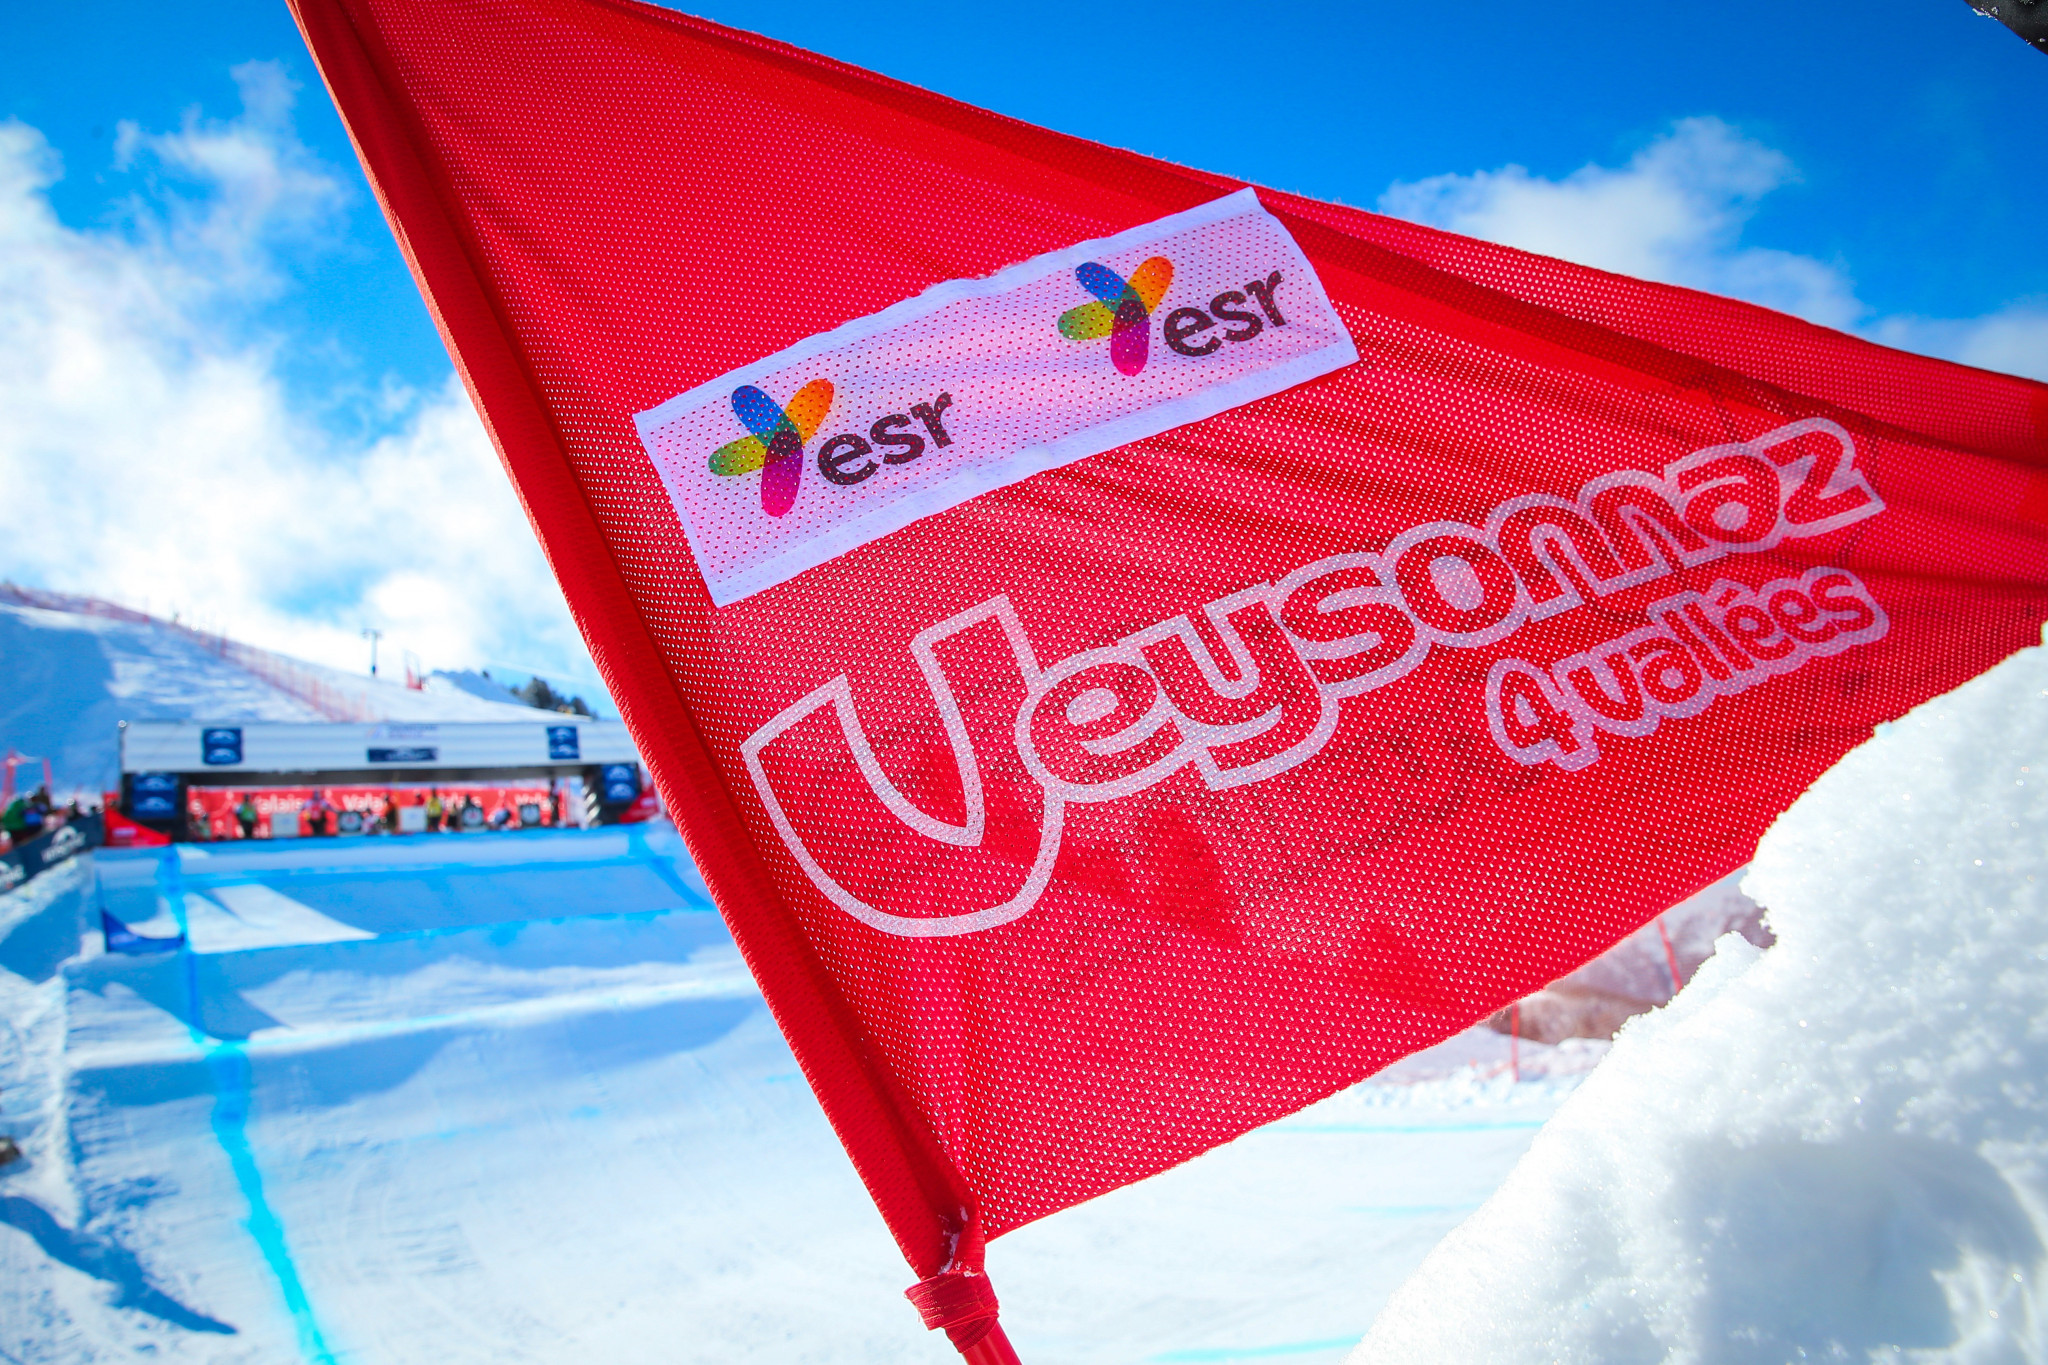 Veysonnaz is set to stage the final rounds of the Ski and Snowboard Cross World Cup events this weekend ©Getty Images